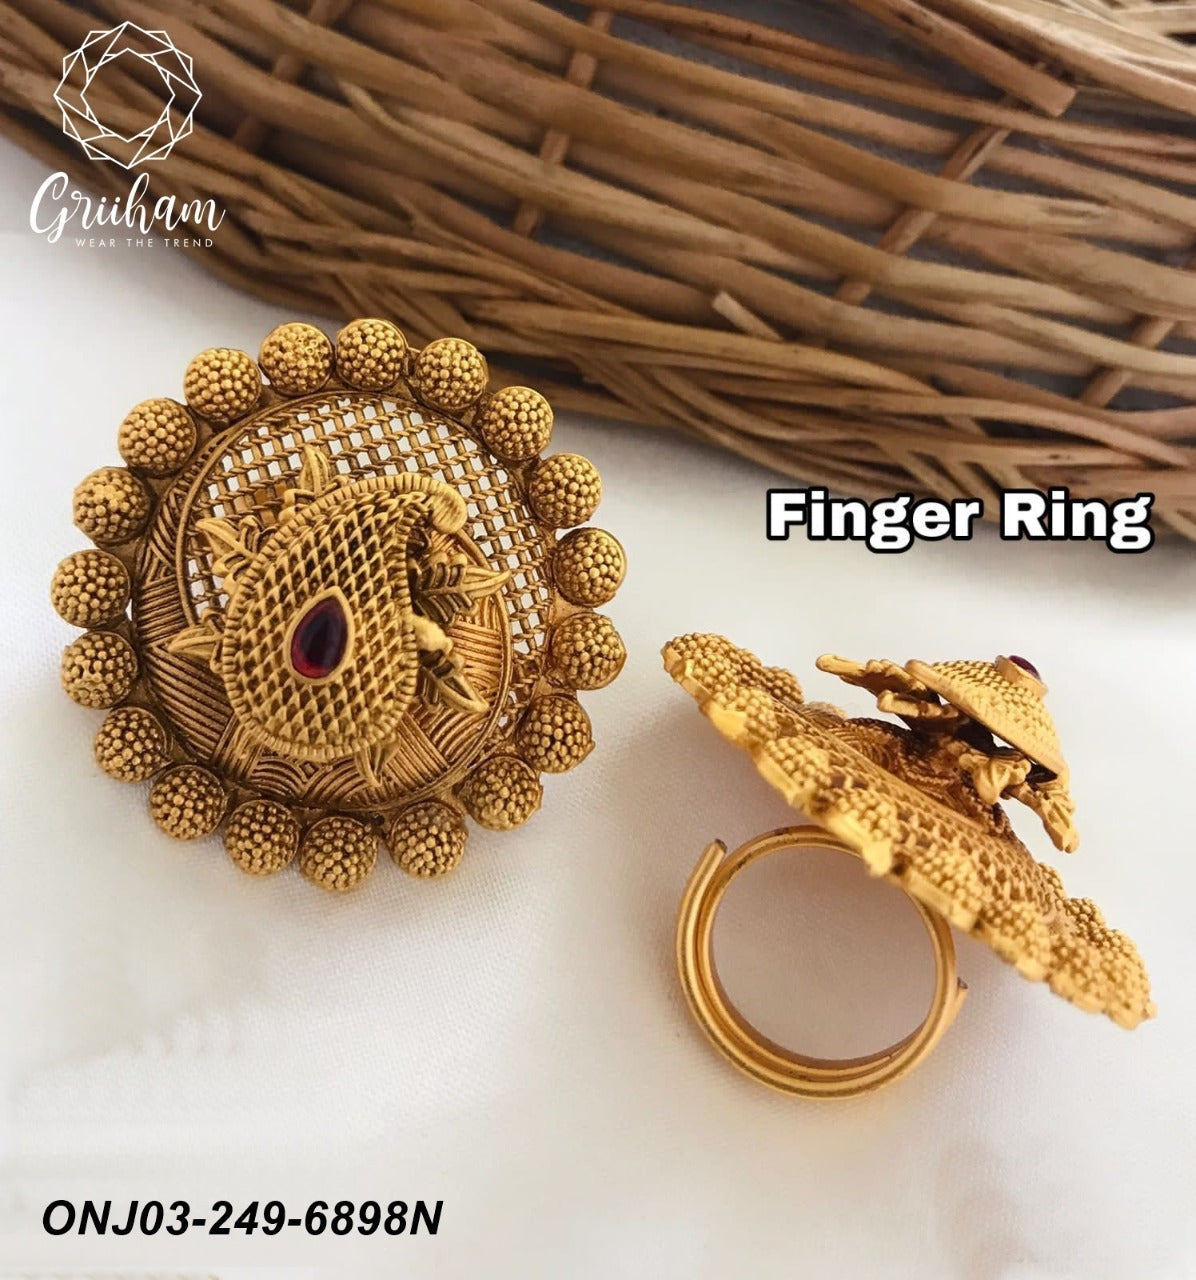 Gold Plated Adjustable Size Finger ring with Stones and Pearls 6898N